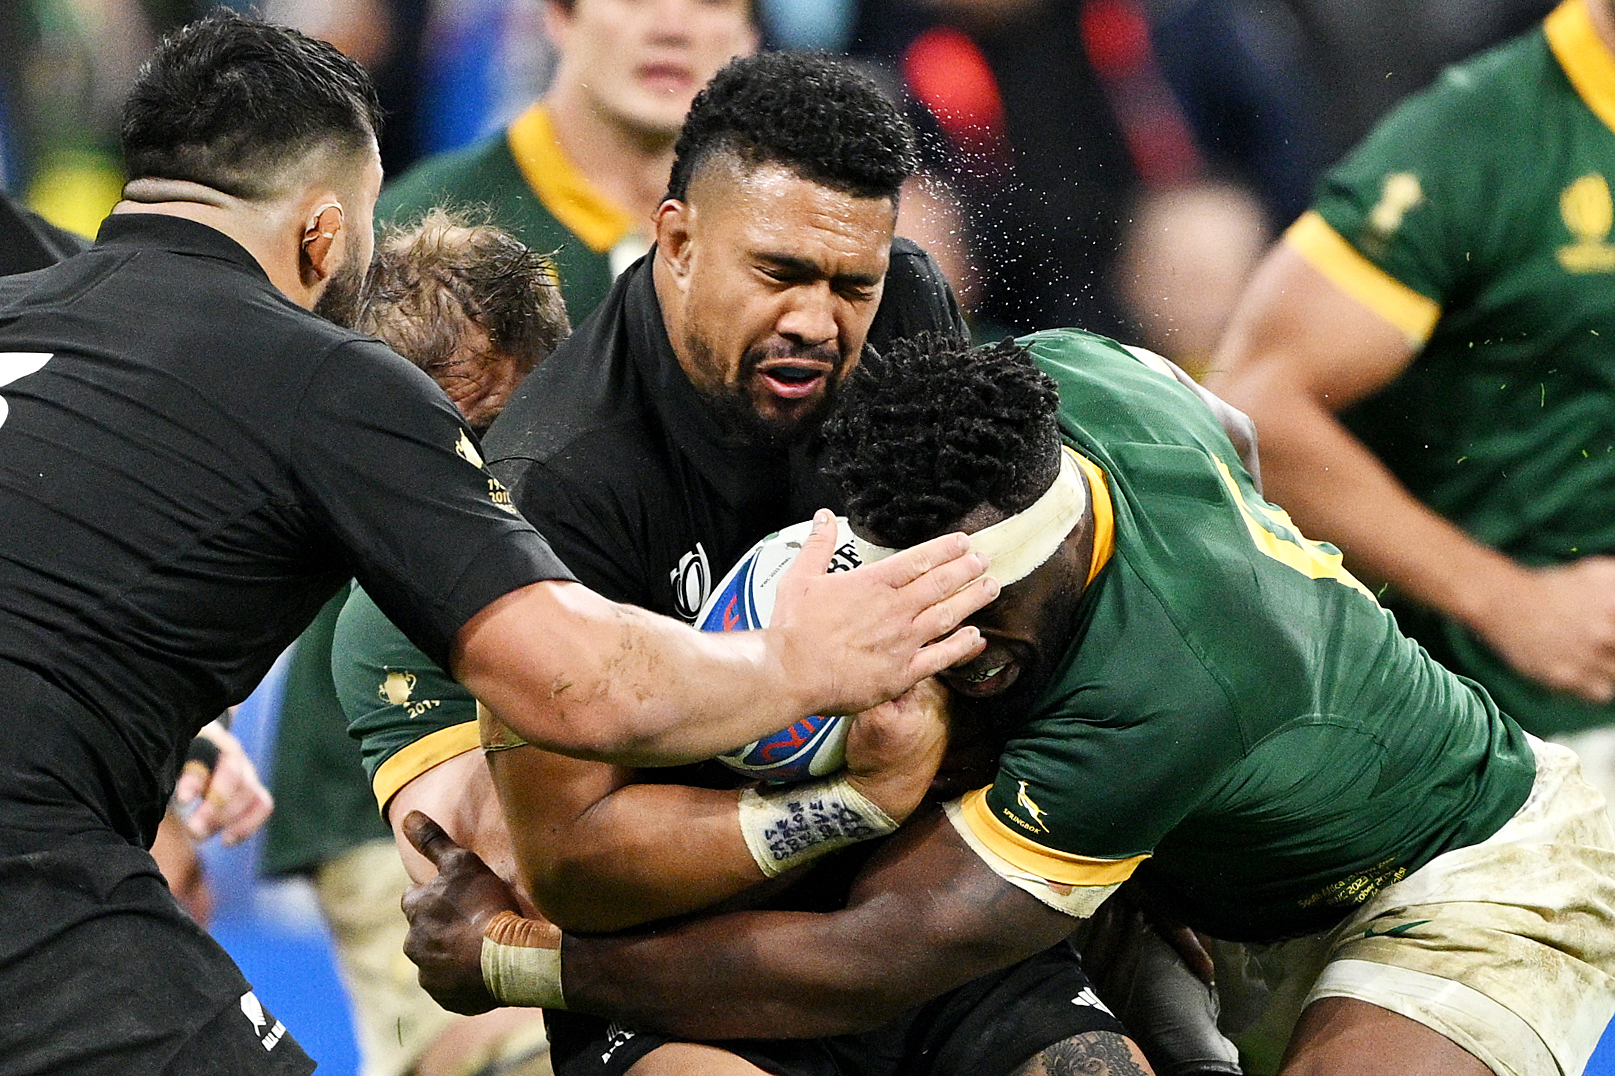 Siya Kolisi of South Africa commits a high tackle with head contact on Ardie Savea of New Zealand.